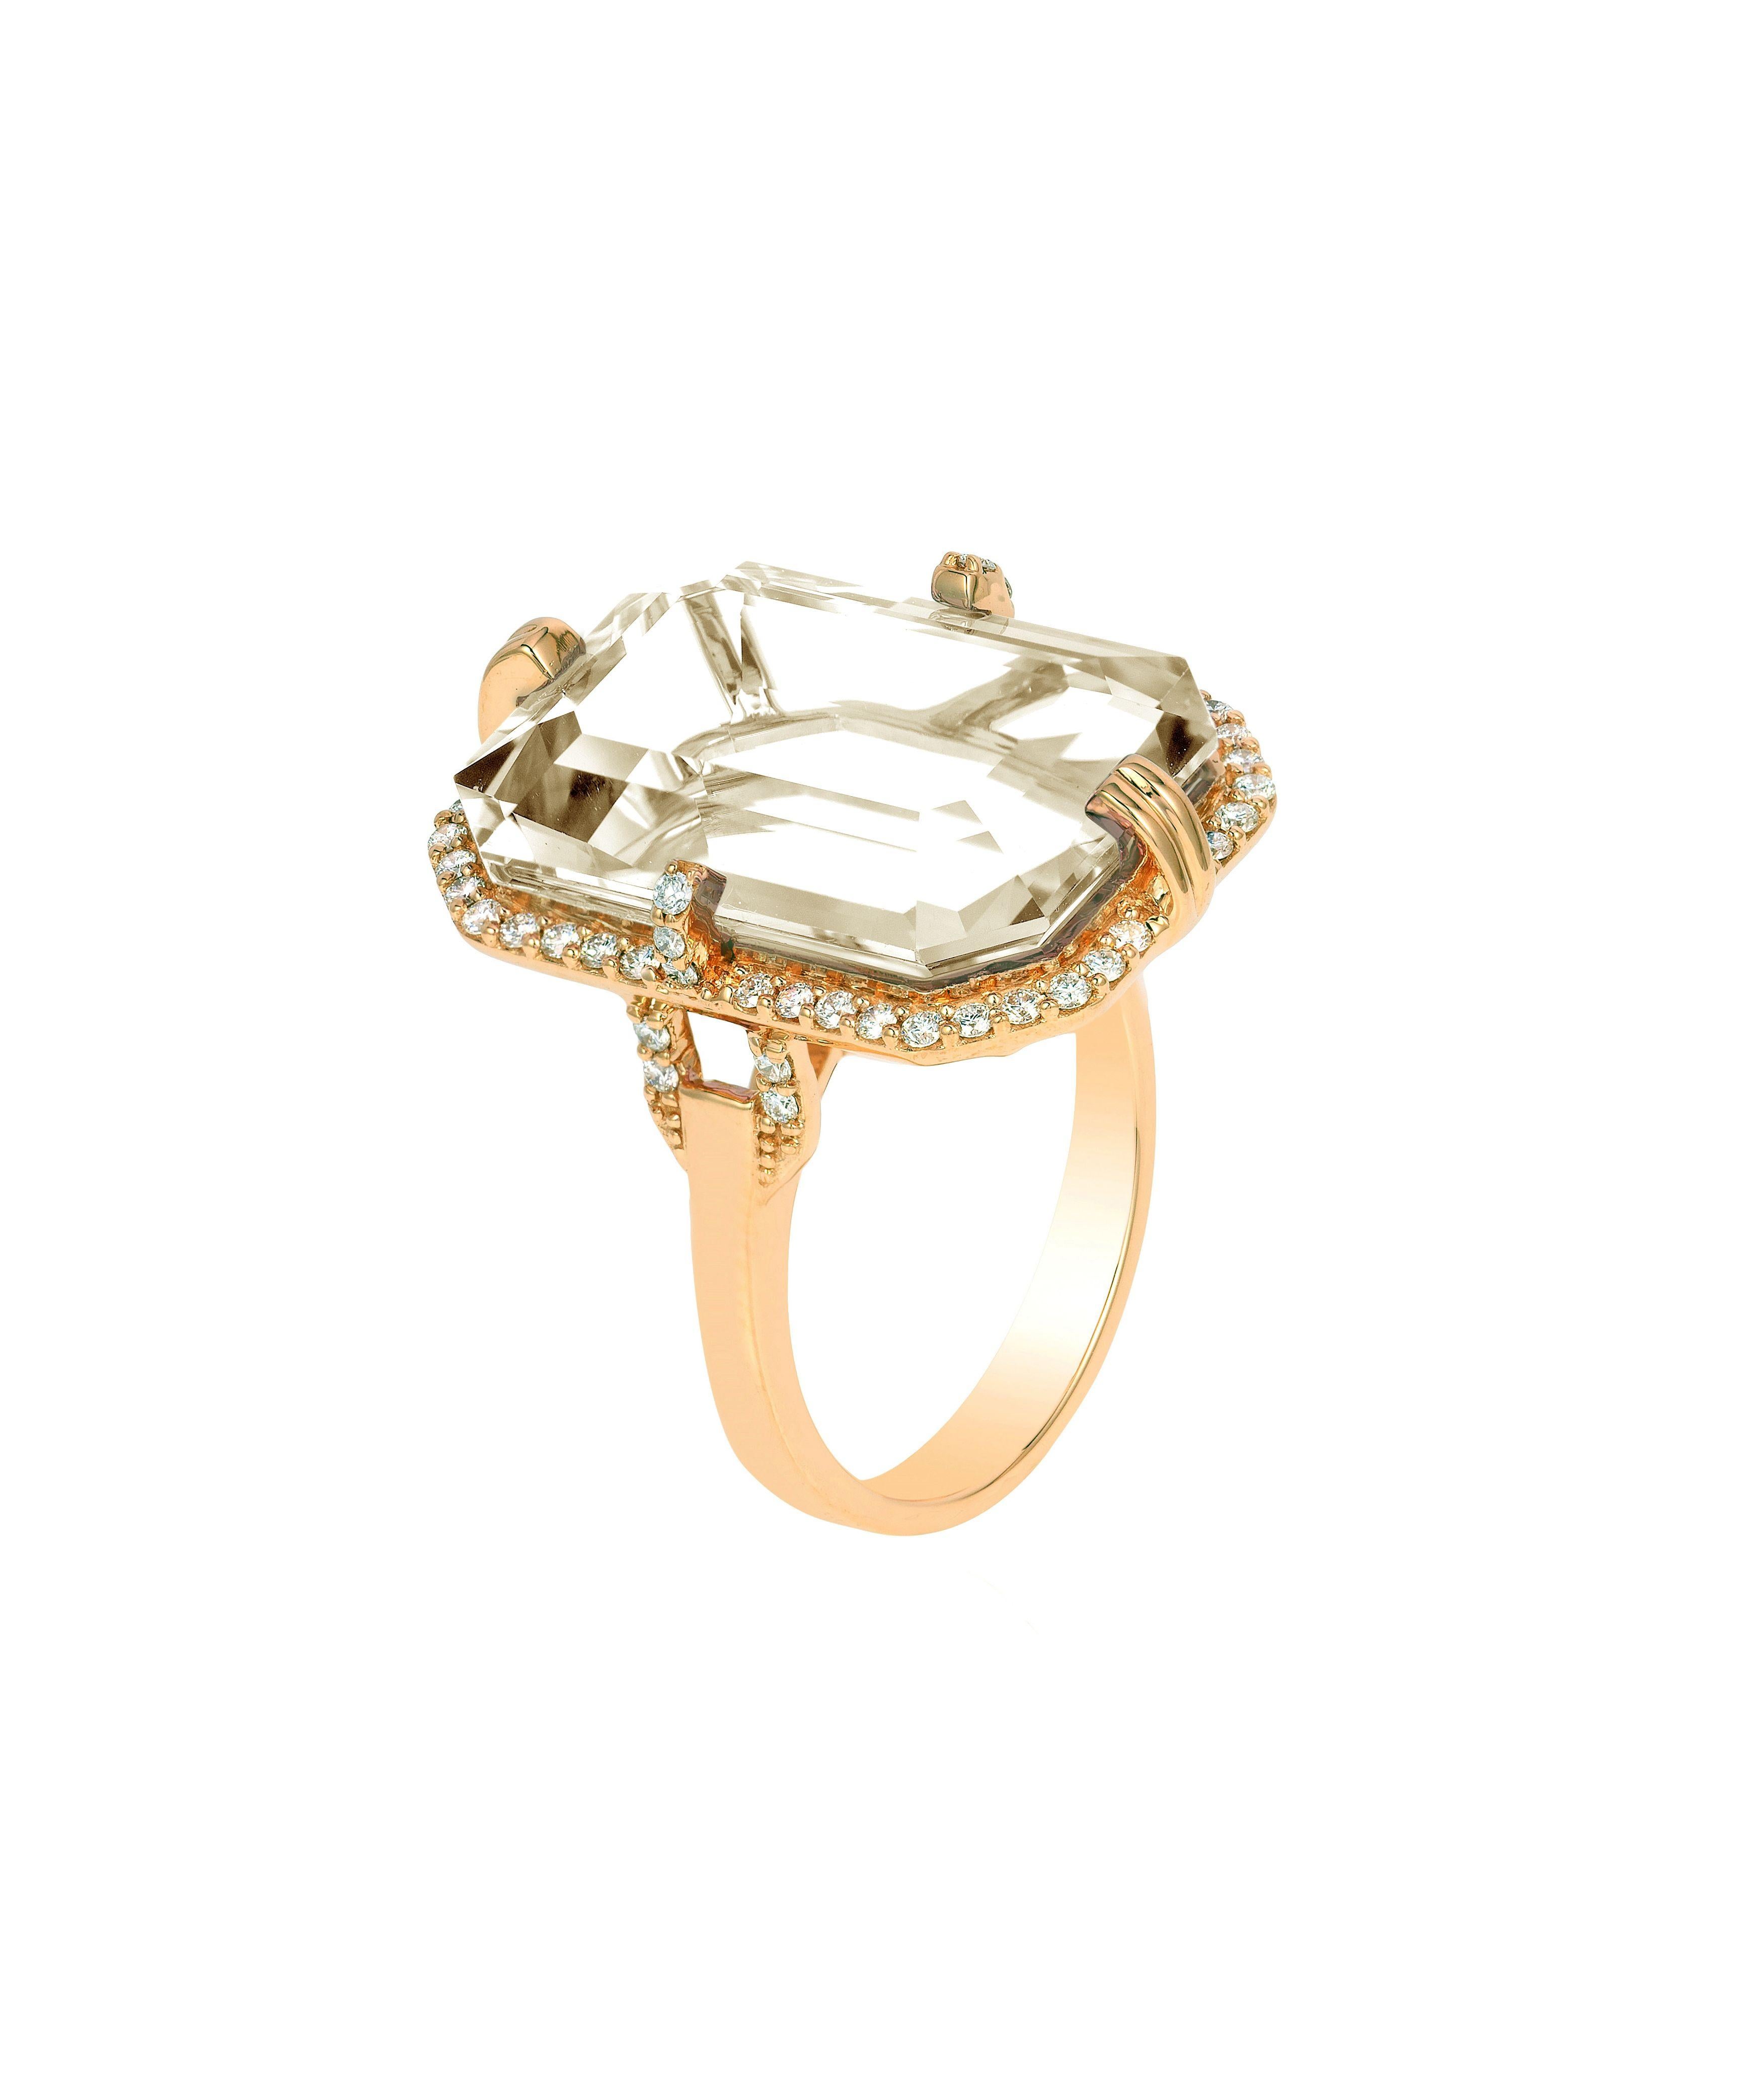 Rock Crystal Emerald Cut Ring with Diamonds in 18K Yellow Gold, From 'Gossip' Collection

Stone Size: 20 x 14 mm 

Gemstone Approx Wt: Rock Crystal- 17.38 Carats

Diamonds: G-H / VS, Approx Wt: 0.41 Carats 